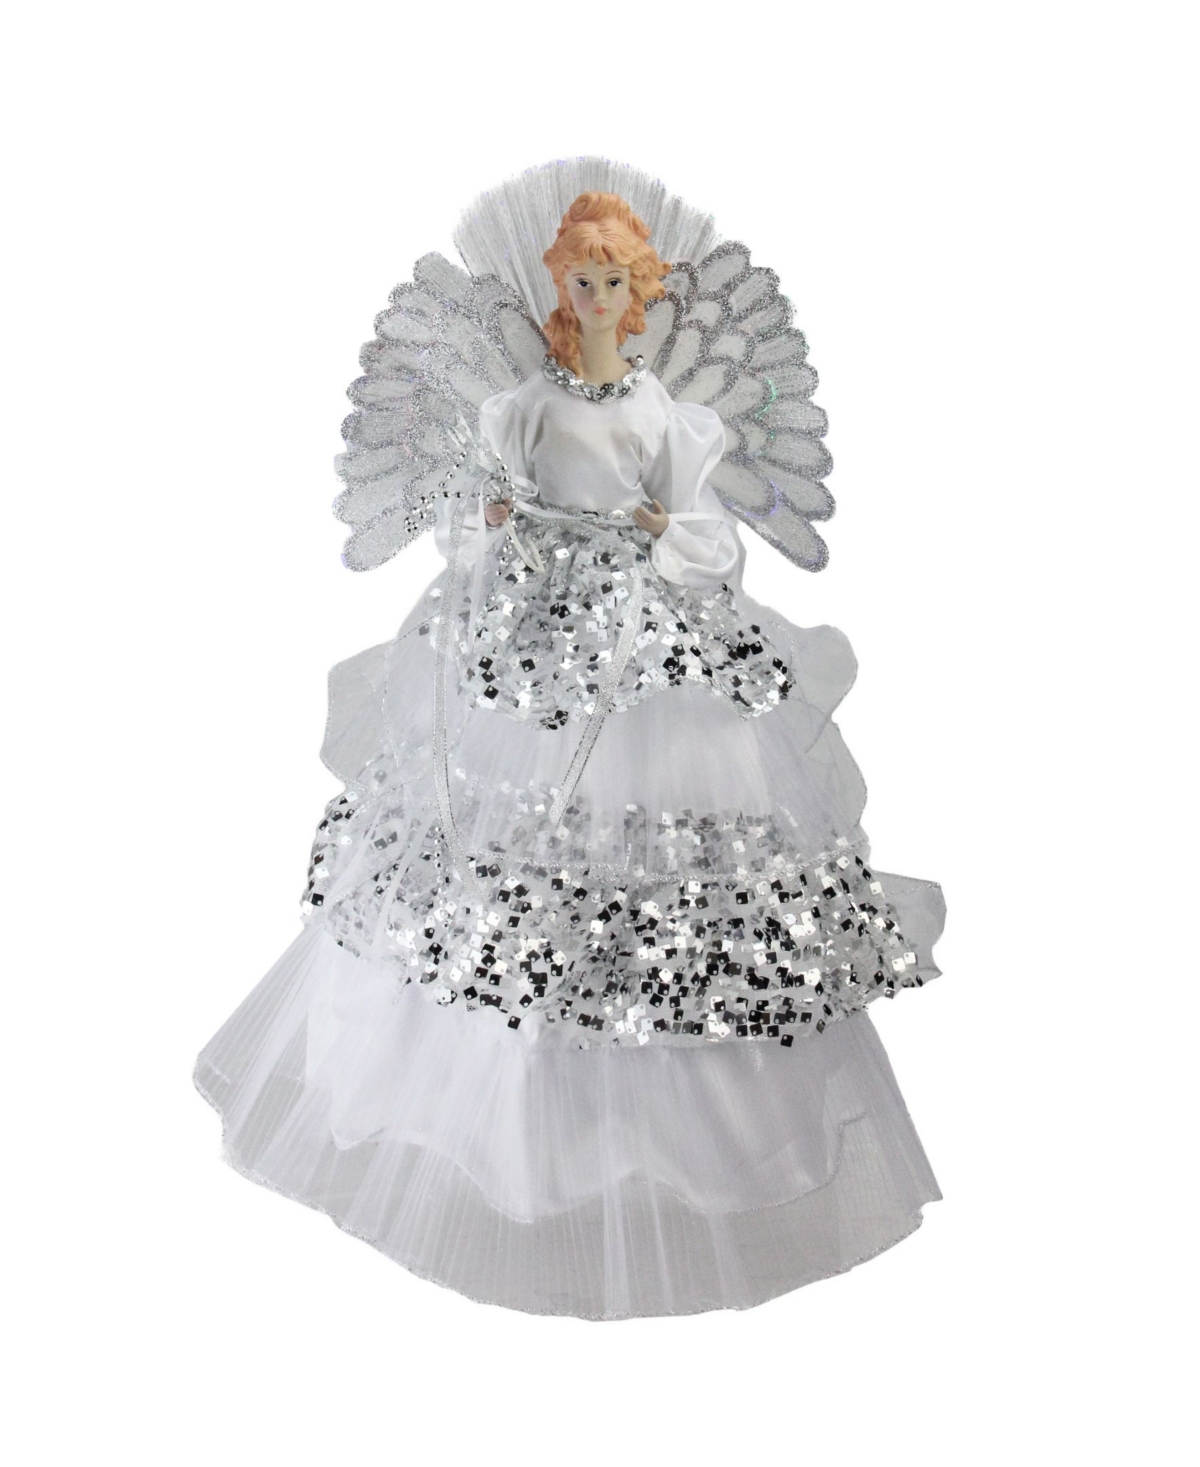 Northlight 16" Lighted Fiber Optic Angel In Silver Sequined Gown Christmas Tree Topper In White